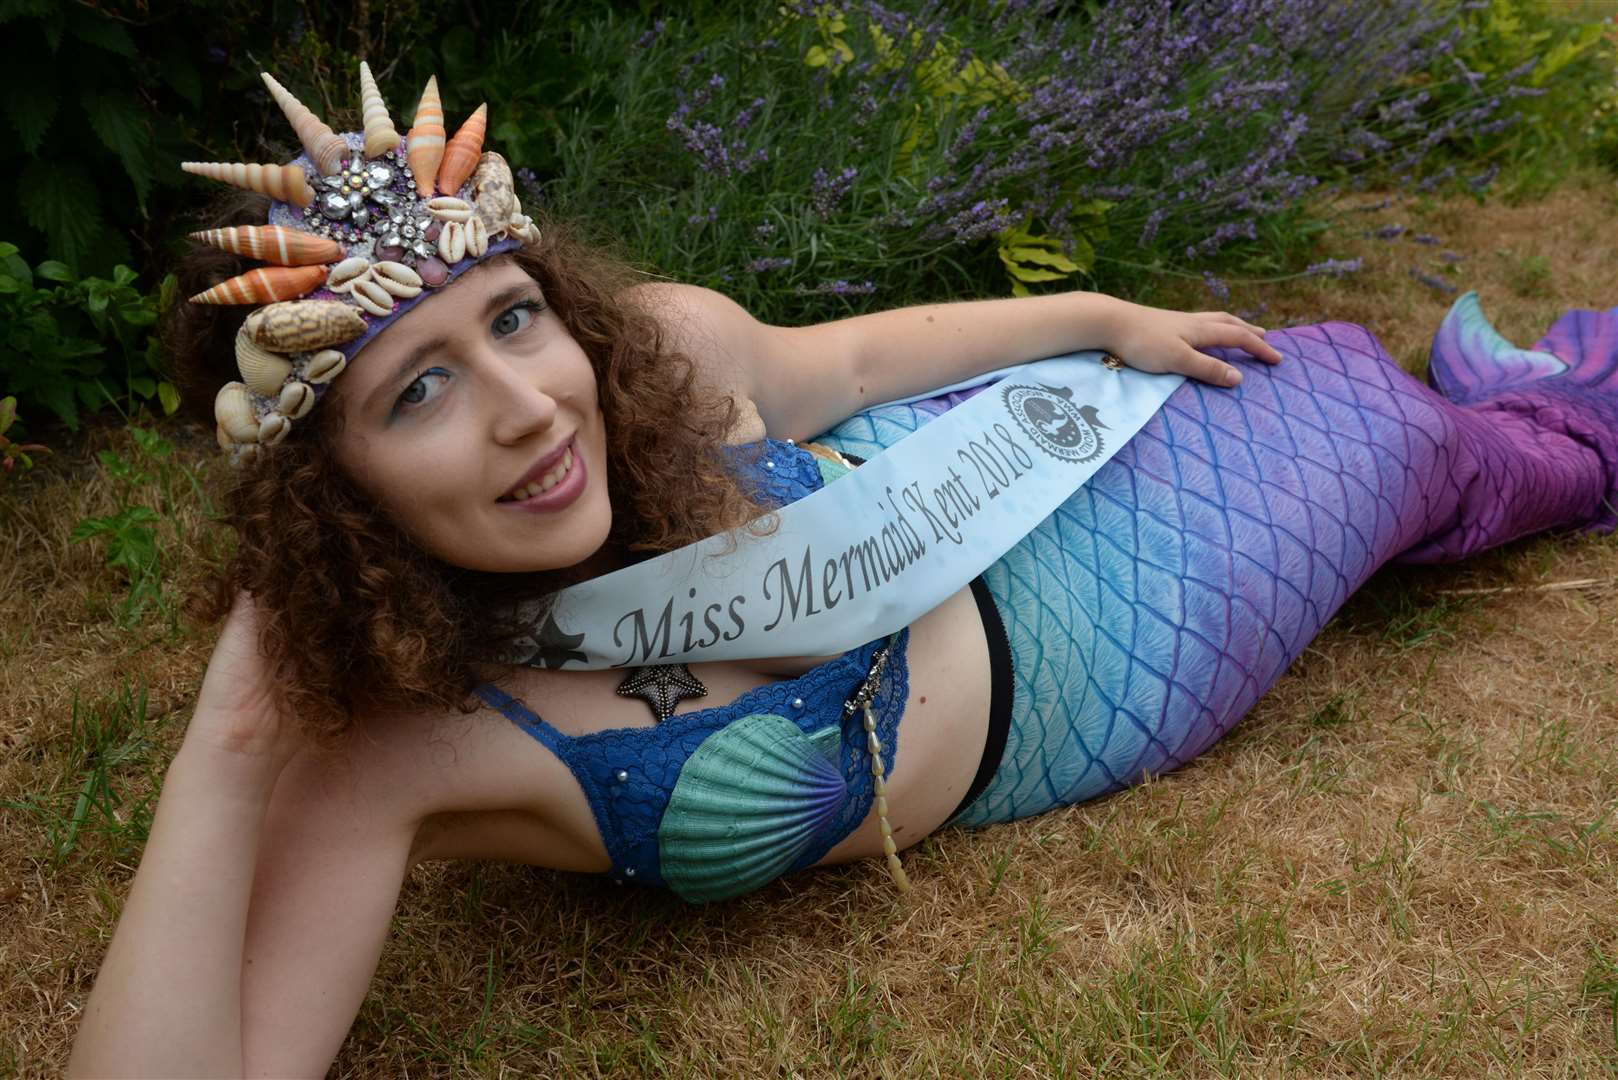 Oceana Pullen of Garlinge Green who will represent Kent in the Miss Mermaid competition. Picture: Chris Davey